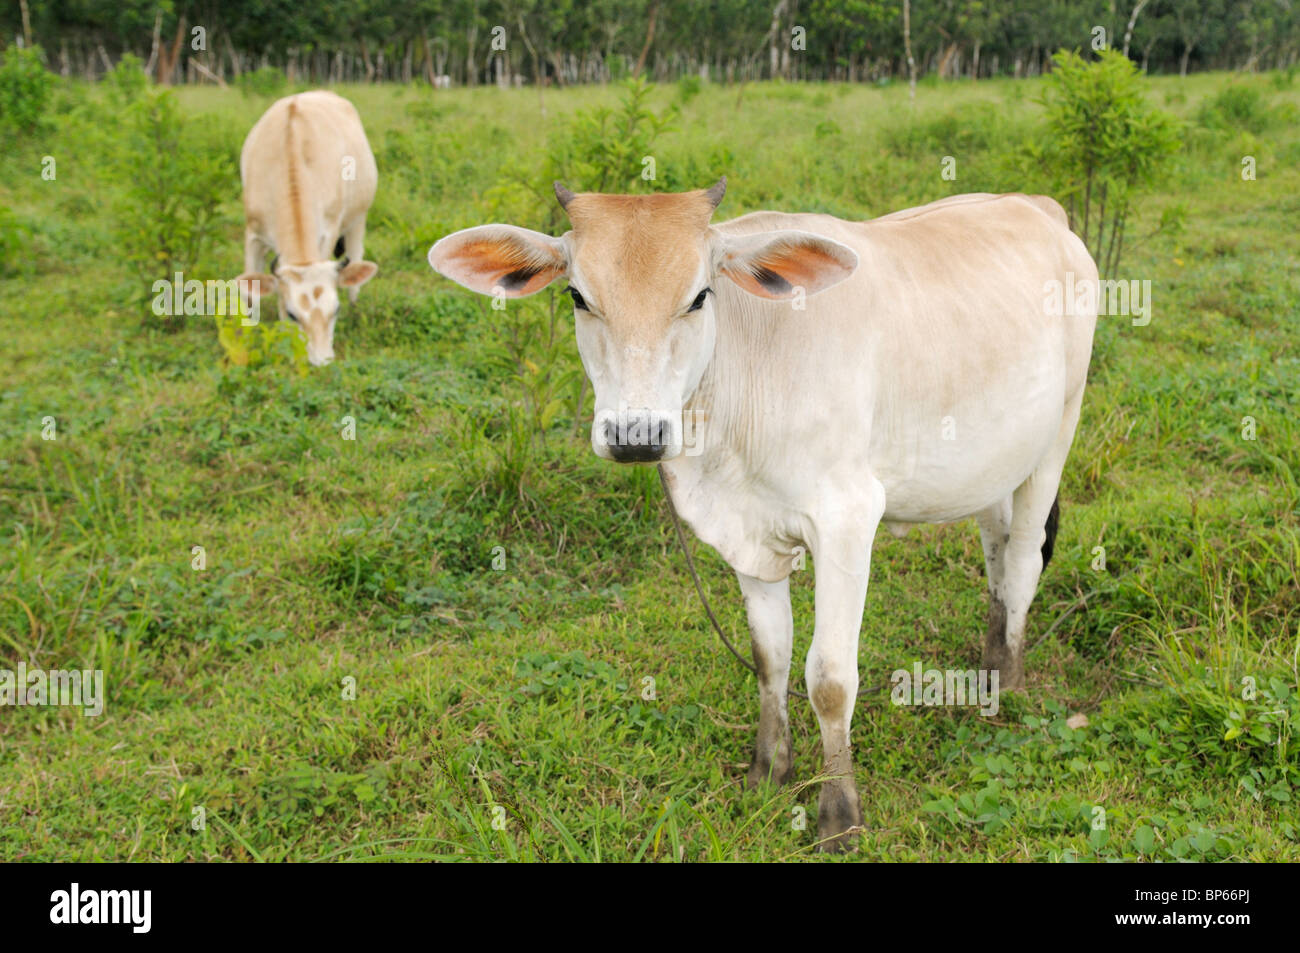 Cows in pasture, on an organic family farm, Chilamate, Costa Rica Stock Photo